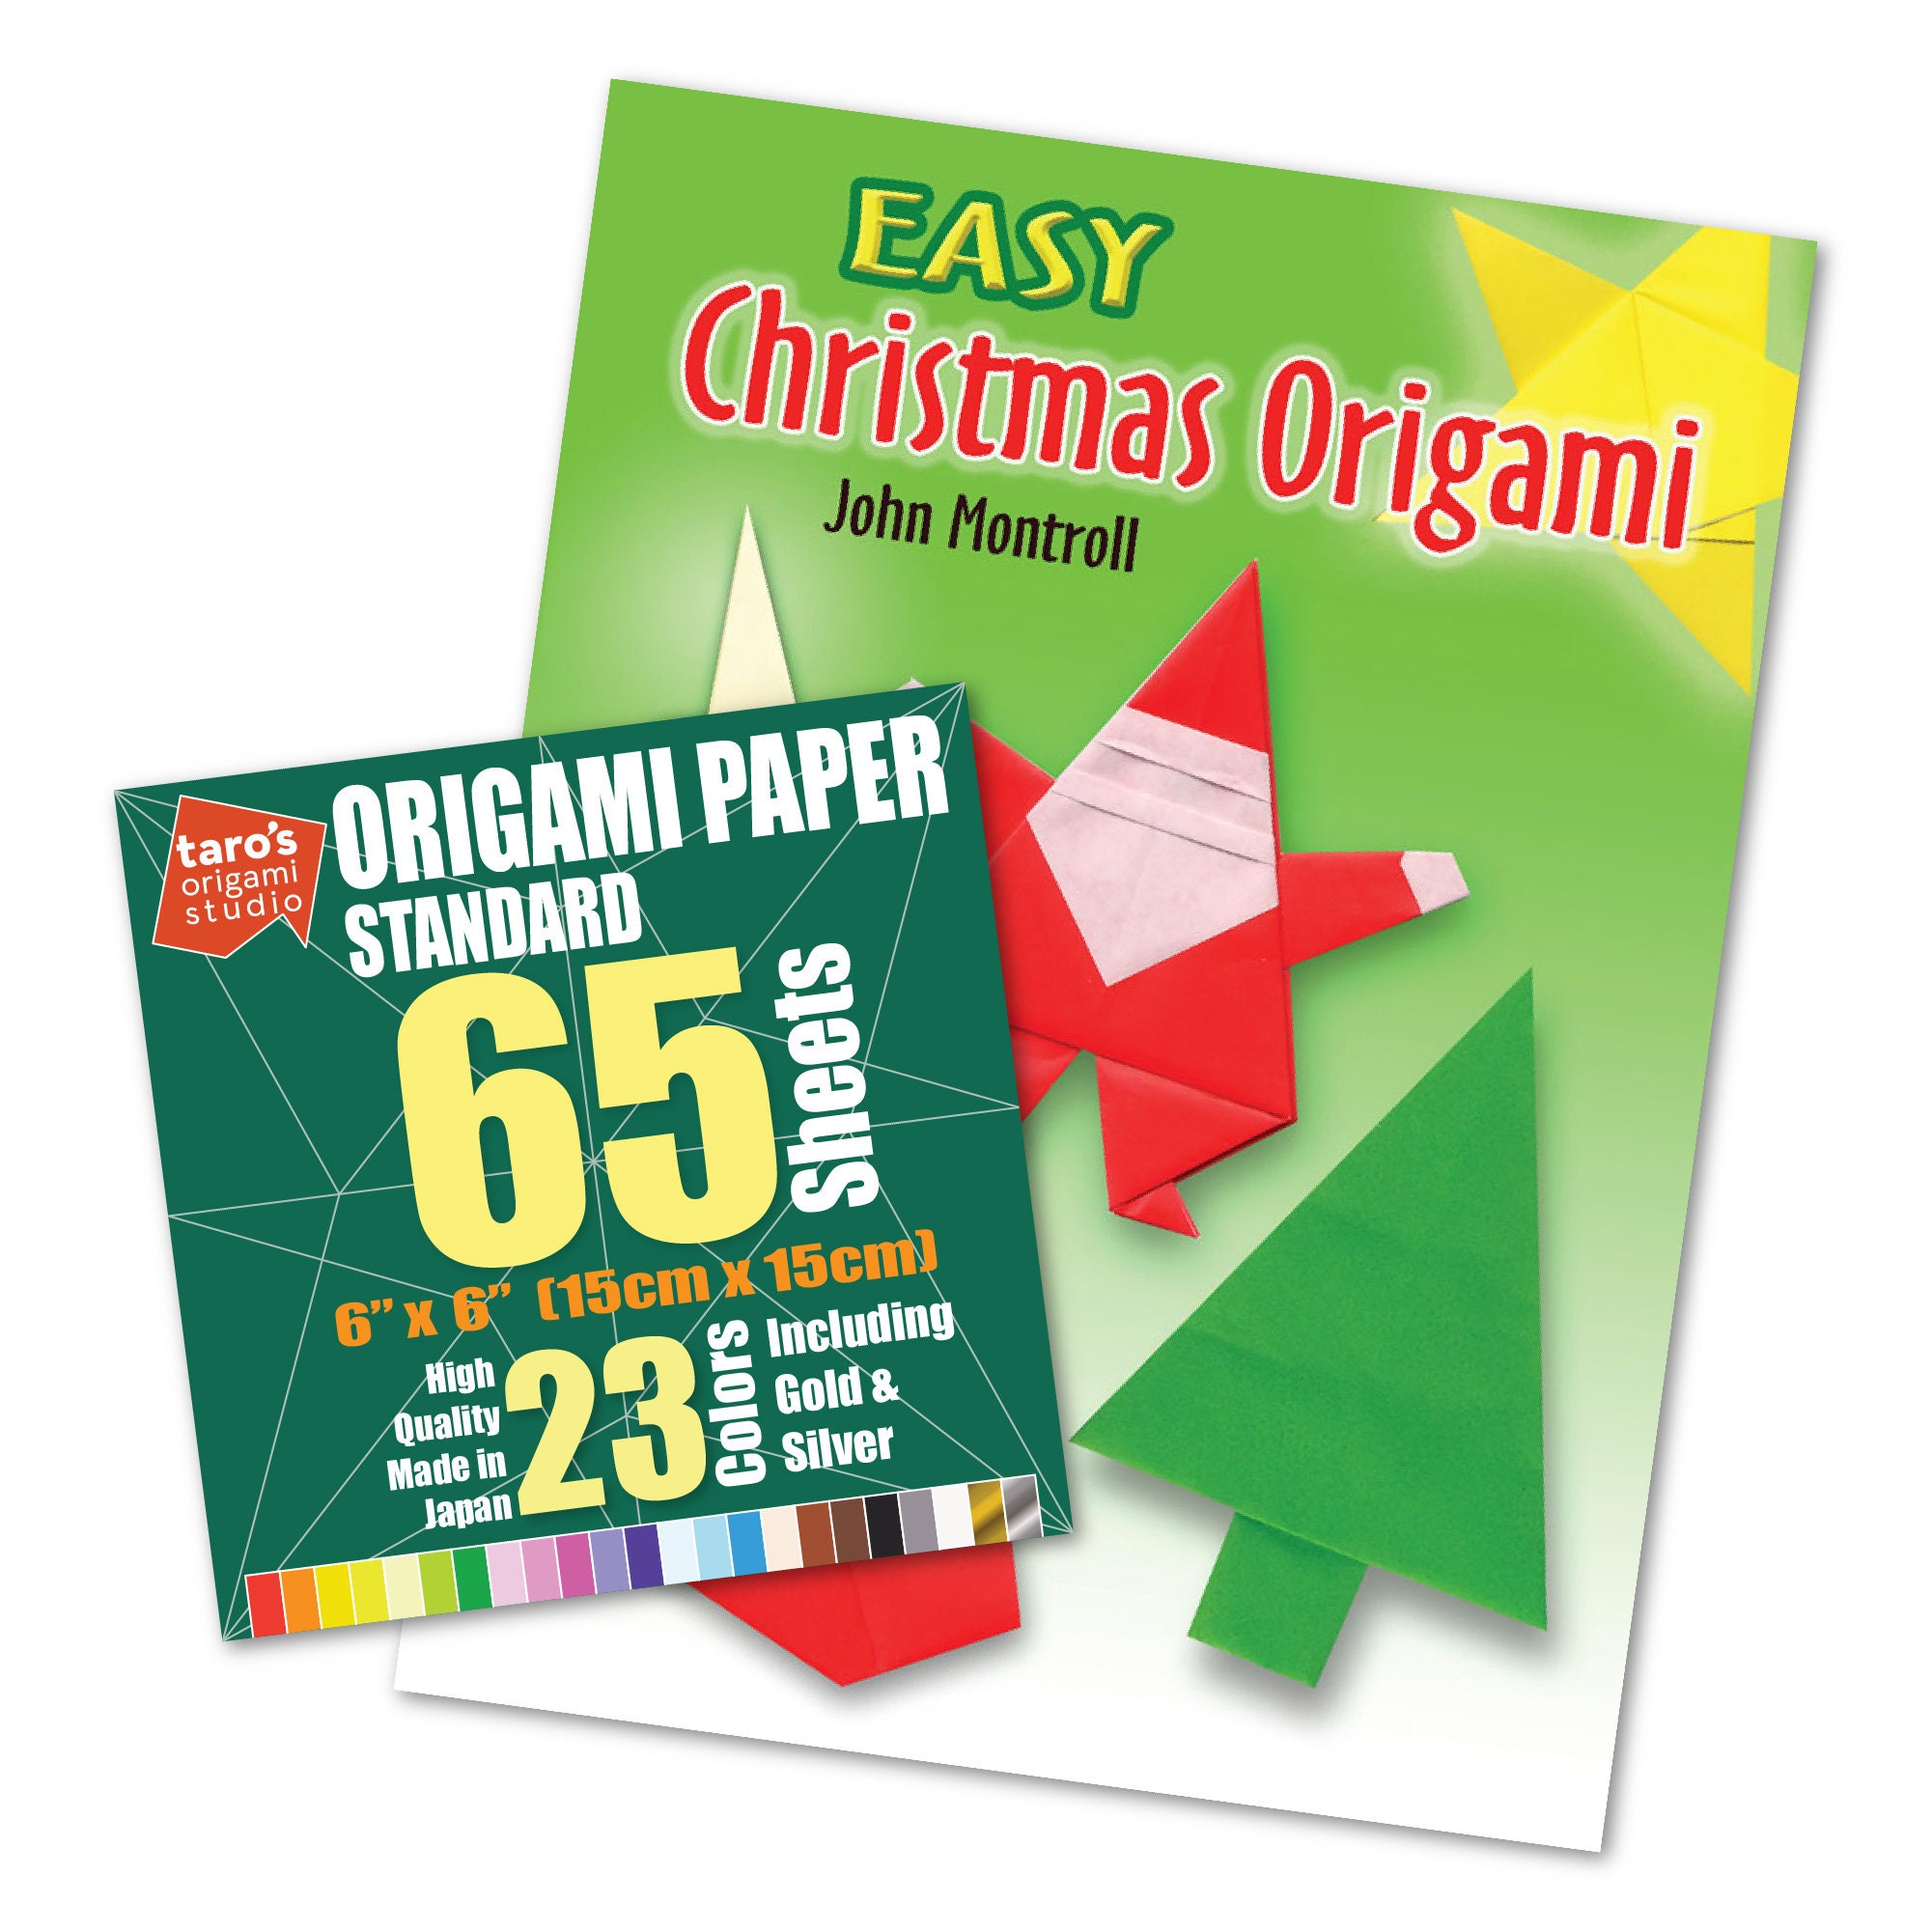 [Taro's Origami Studio] Large 10 inch One Sided 50 Colors 50 Sheets Square Easy Fold Premium Japanese Paper for Beginner (Gold and Silver Included)